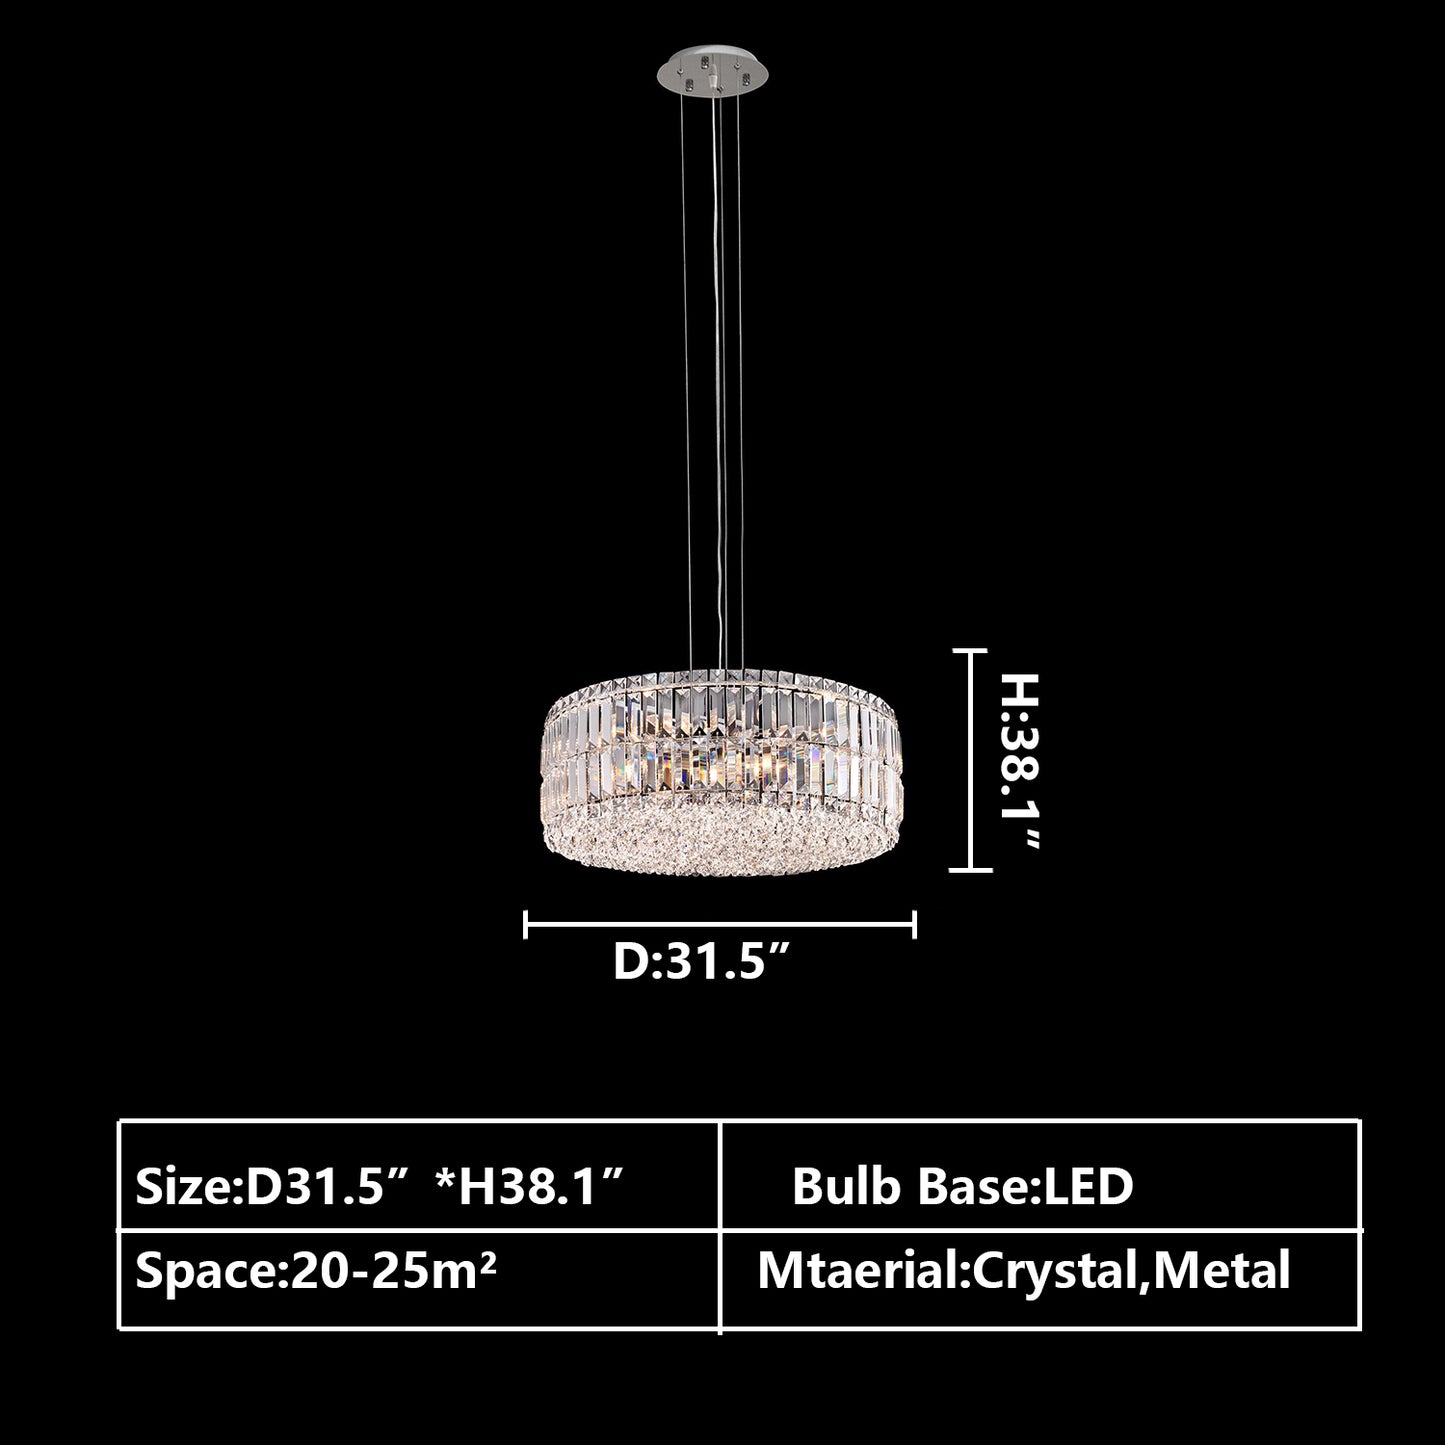 Round:D31.5"*H38.1" chandelier,chandeliers,pendant,round,oval,ceiling,crystal,metal,chrome,silver,clear crystal,adjustable,chain,light luxury,luxury,living room,dining room,foyer,entrys,hallway,bathroom,bedroom,home office